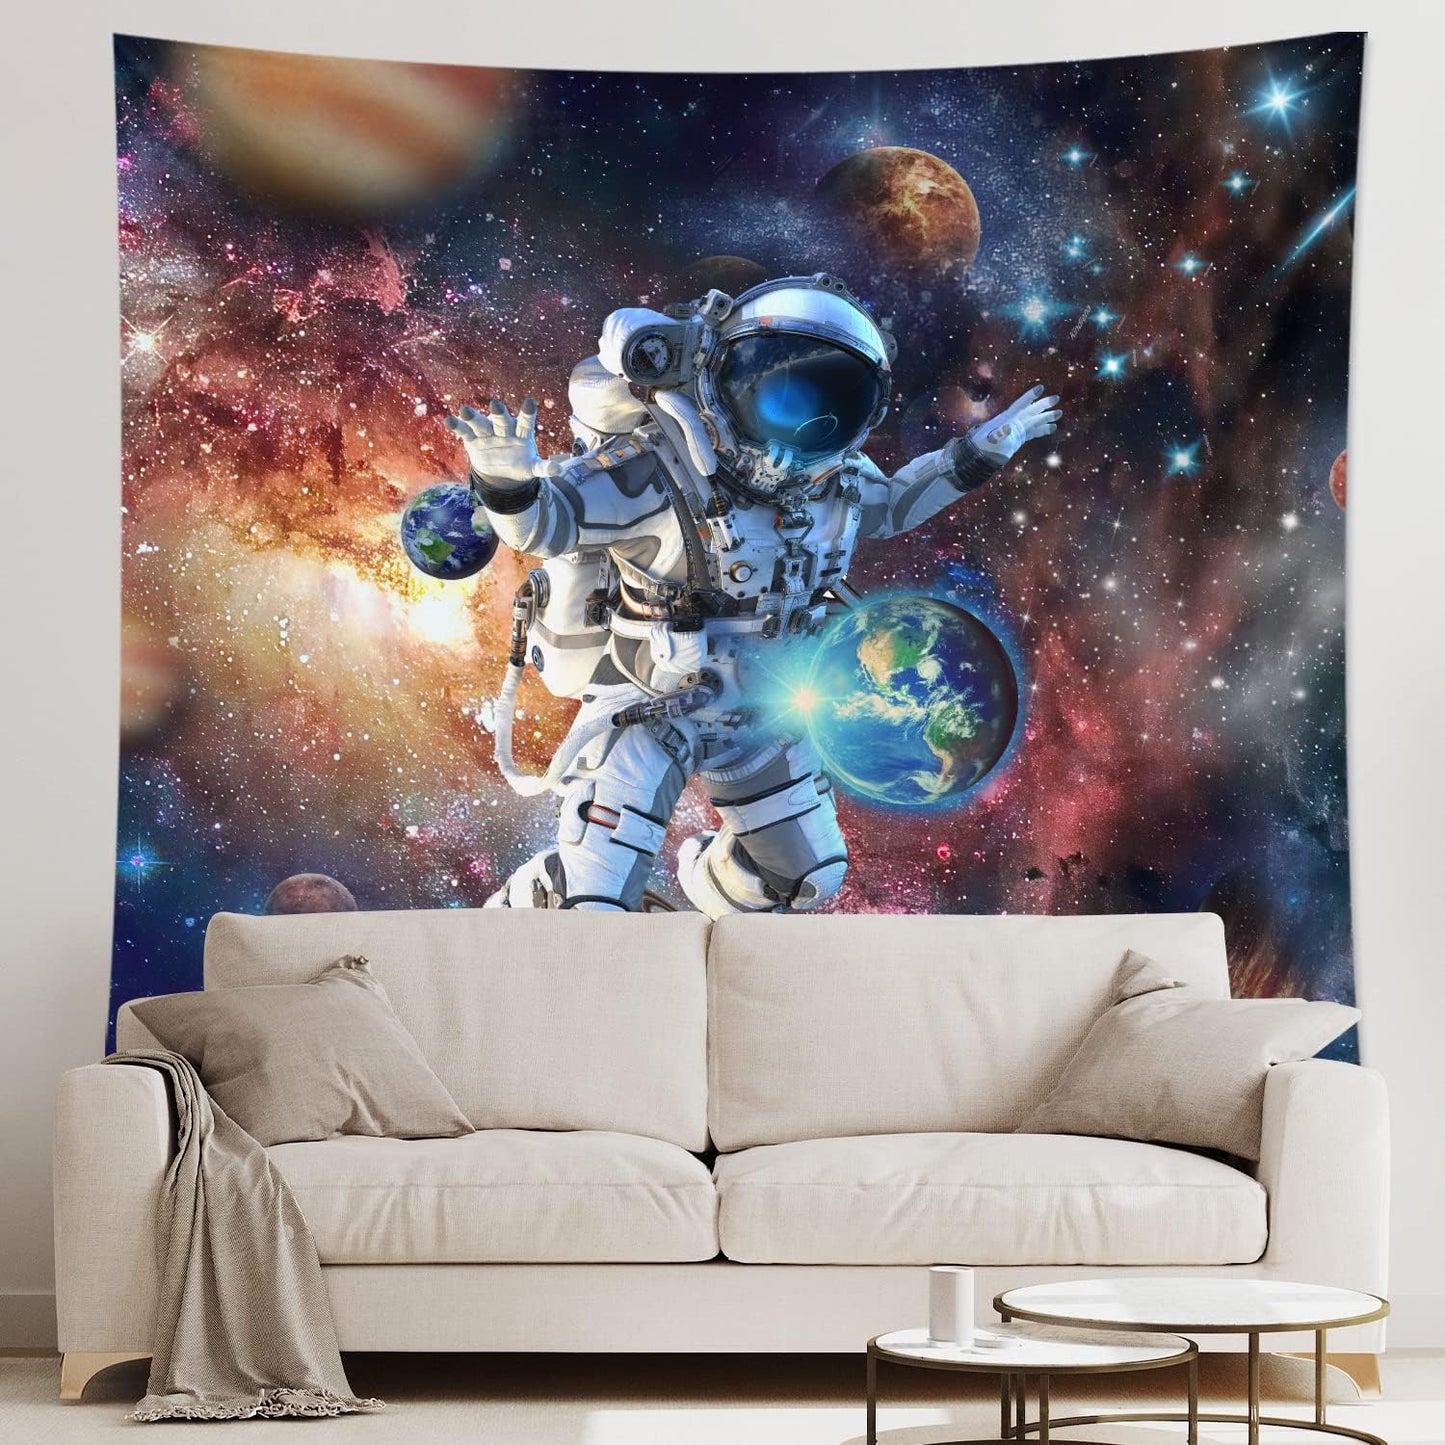 Astronaut Tapestry Space Tapestry Wall Hanging Tapestry Aesthetic Tapestry for Living Room Kids Boys Tapestry for Bedroom Decor 59x51 Inch